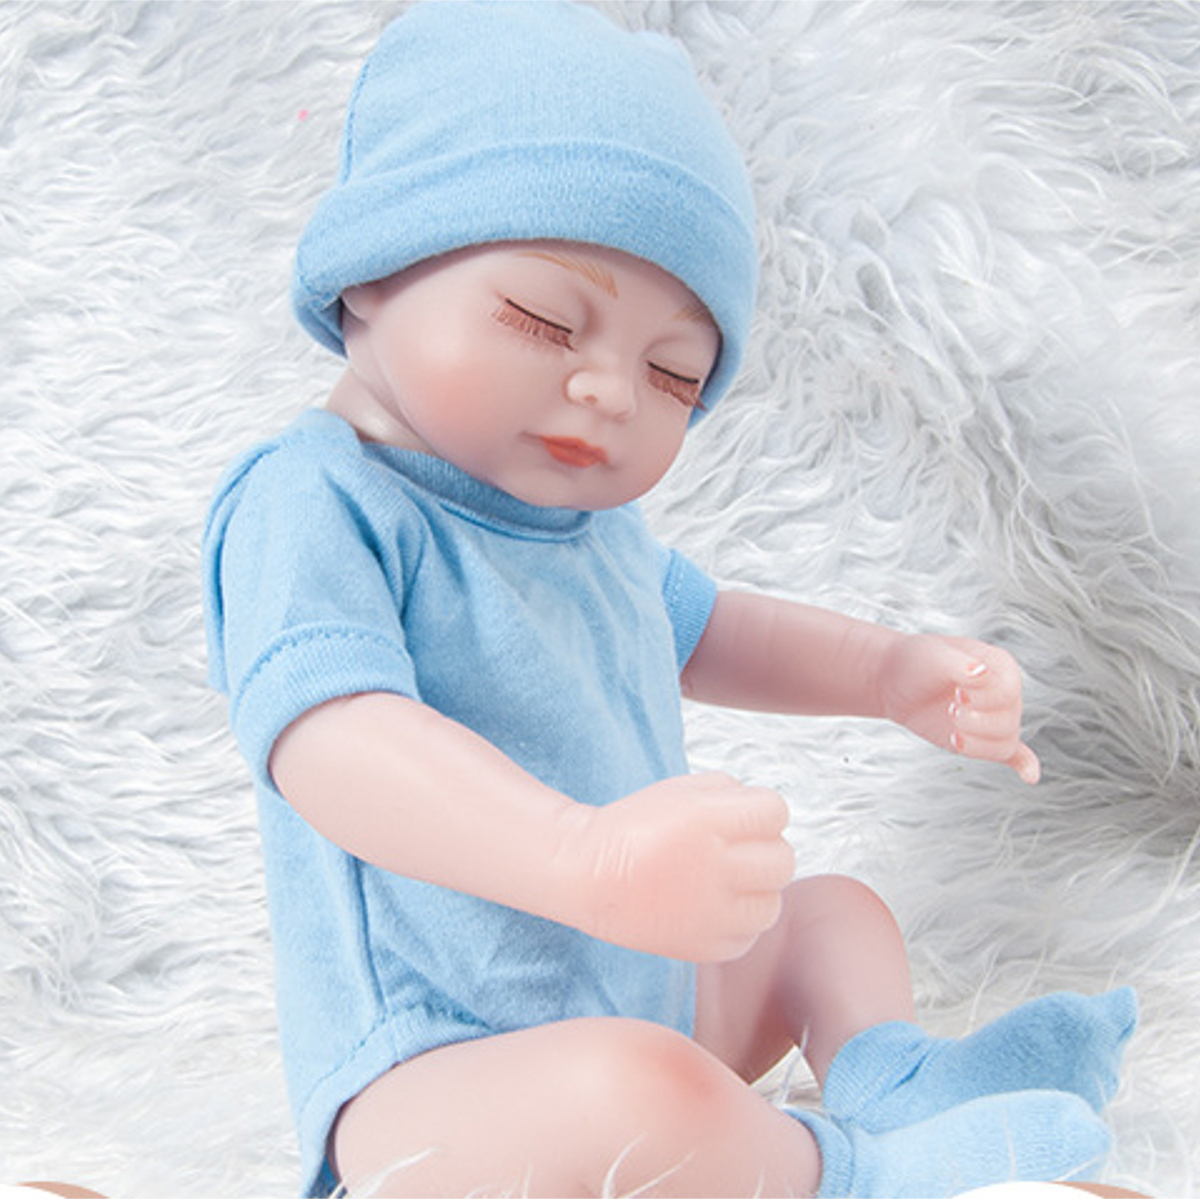 28CM-Soft-Silicone-Realistic-Sleeping-Reborns-Lifelikes-Newborns-Baby-Doll-Toy-with-Moveable-Head-Ar-1891375-6